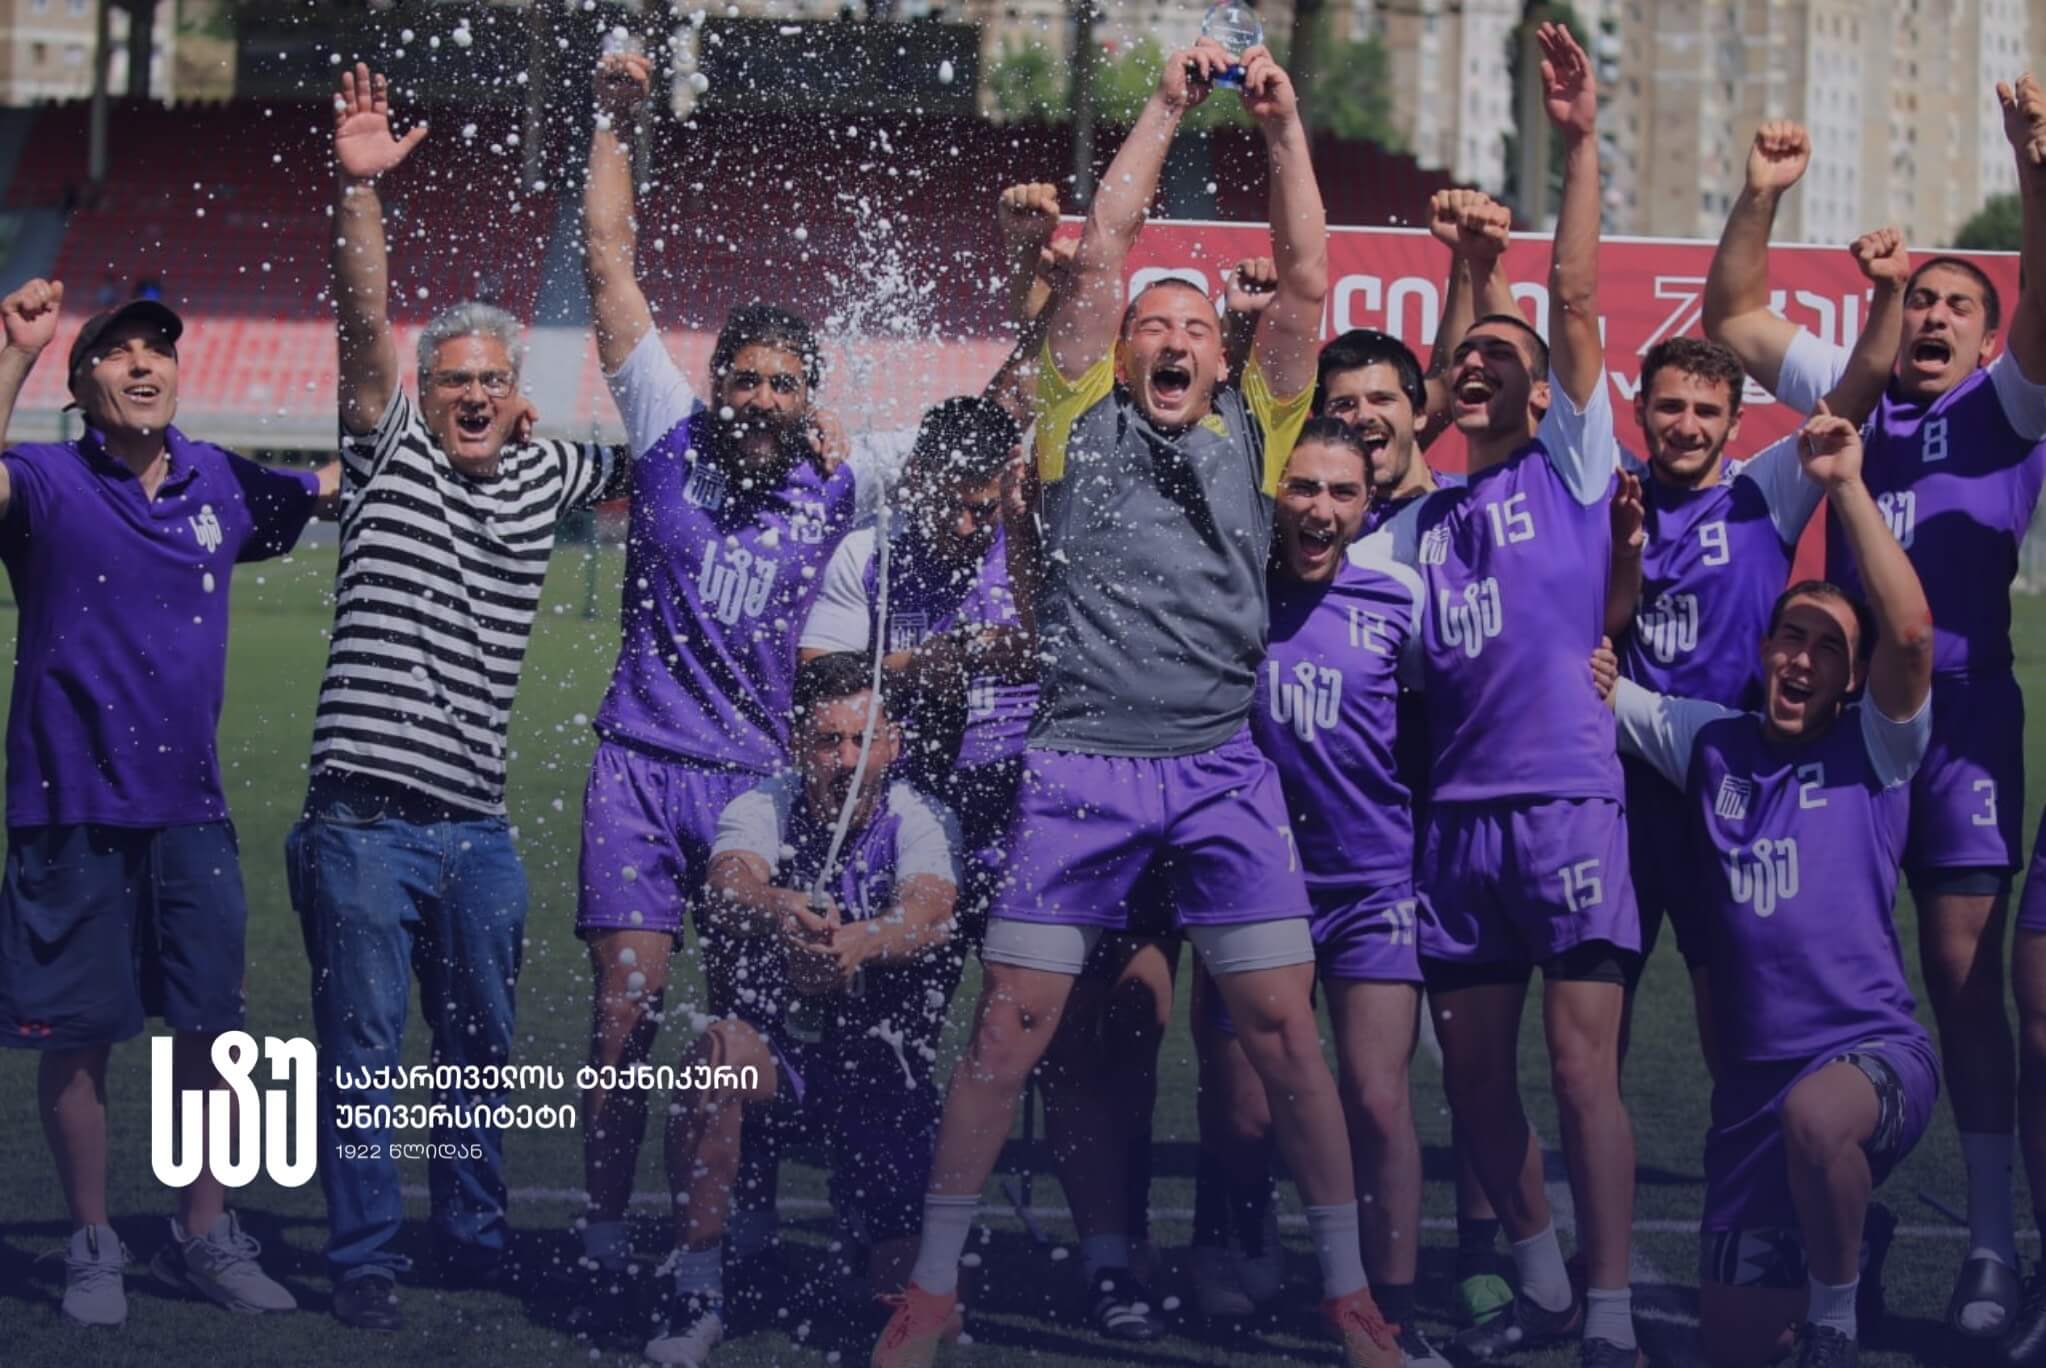 The GTU team “Shvidkaca” is the winner of the Tbilisi Rugby Tournament